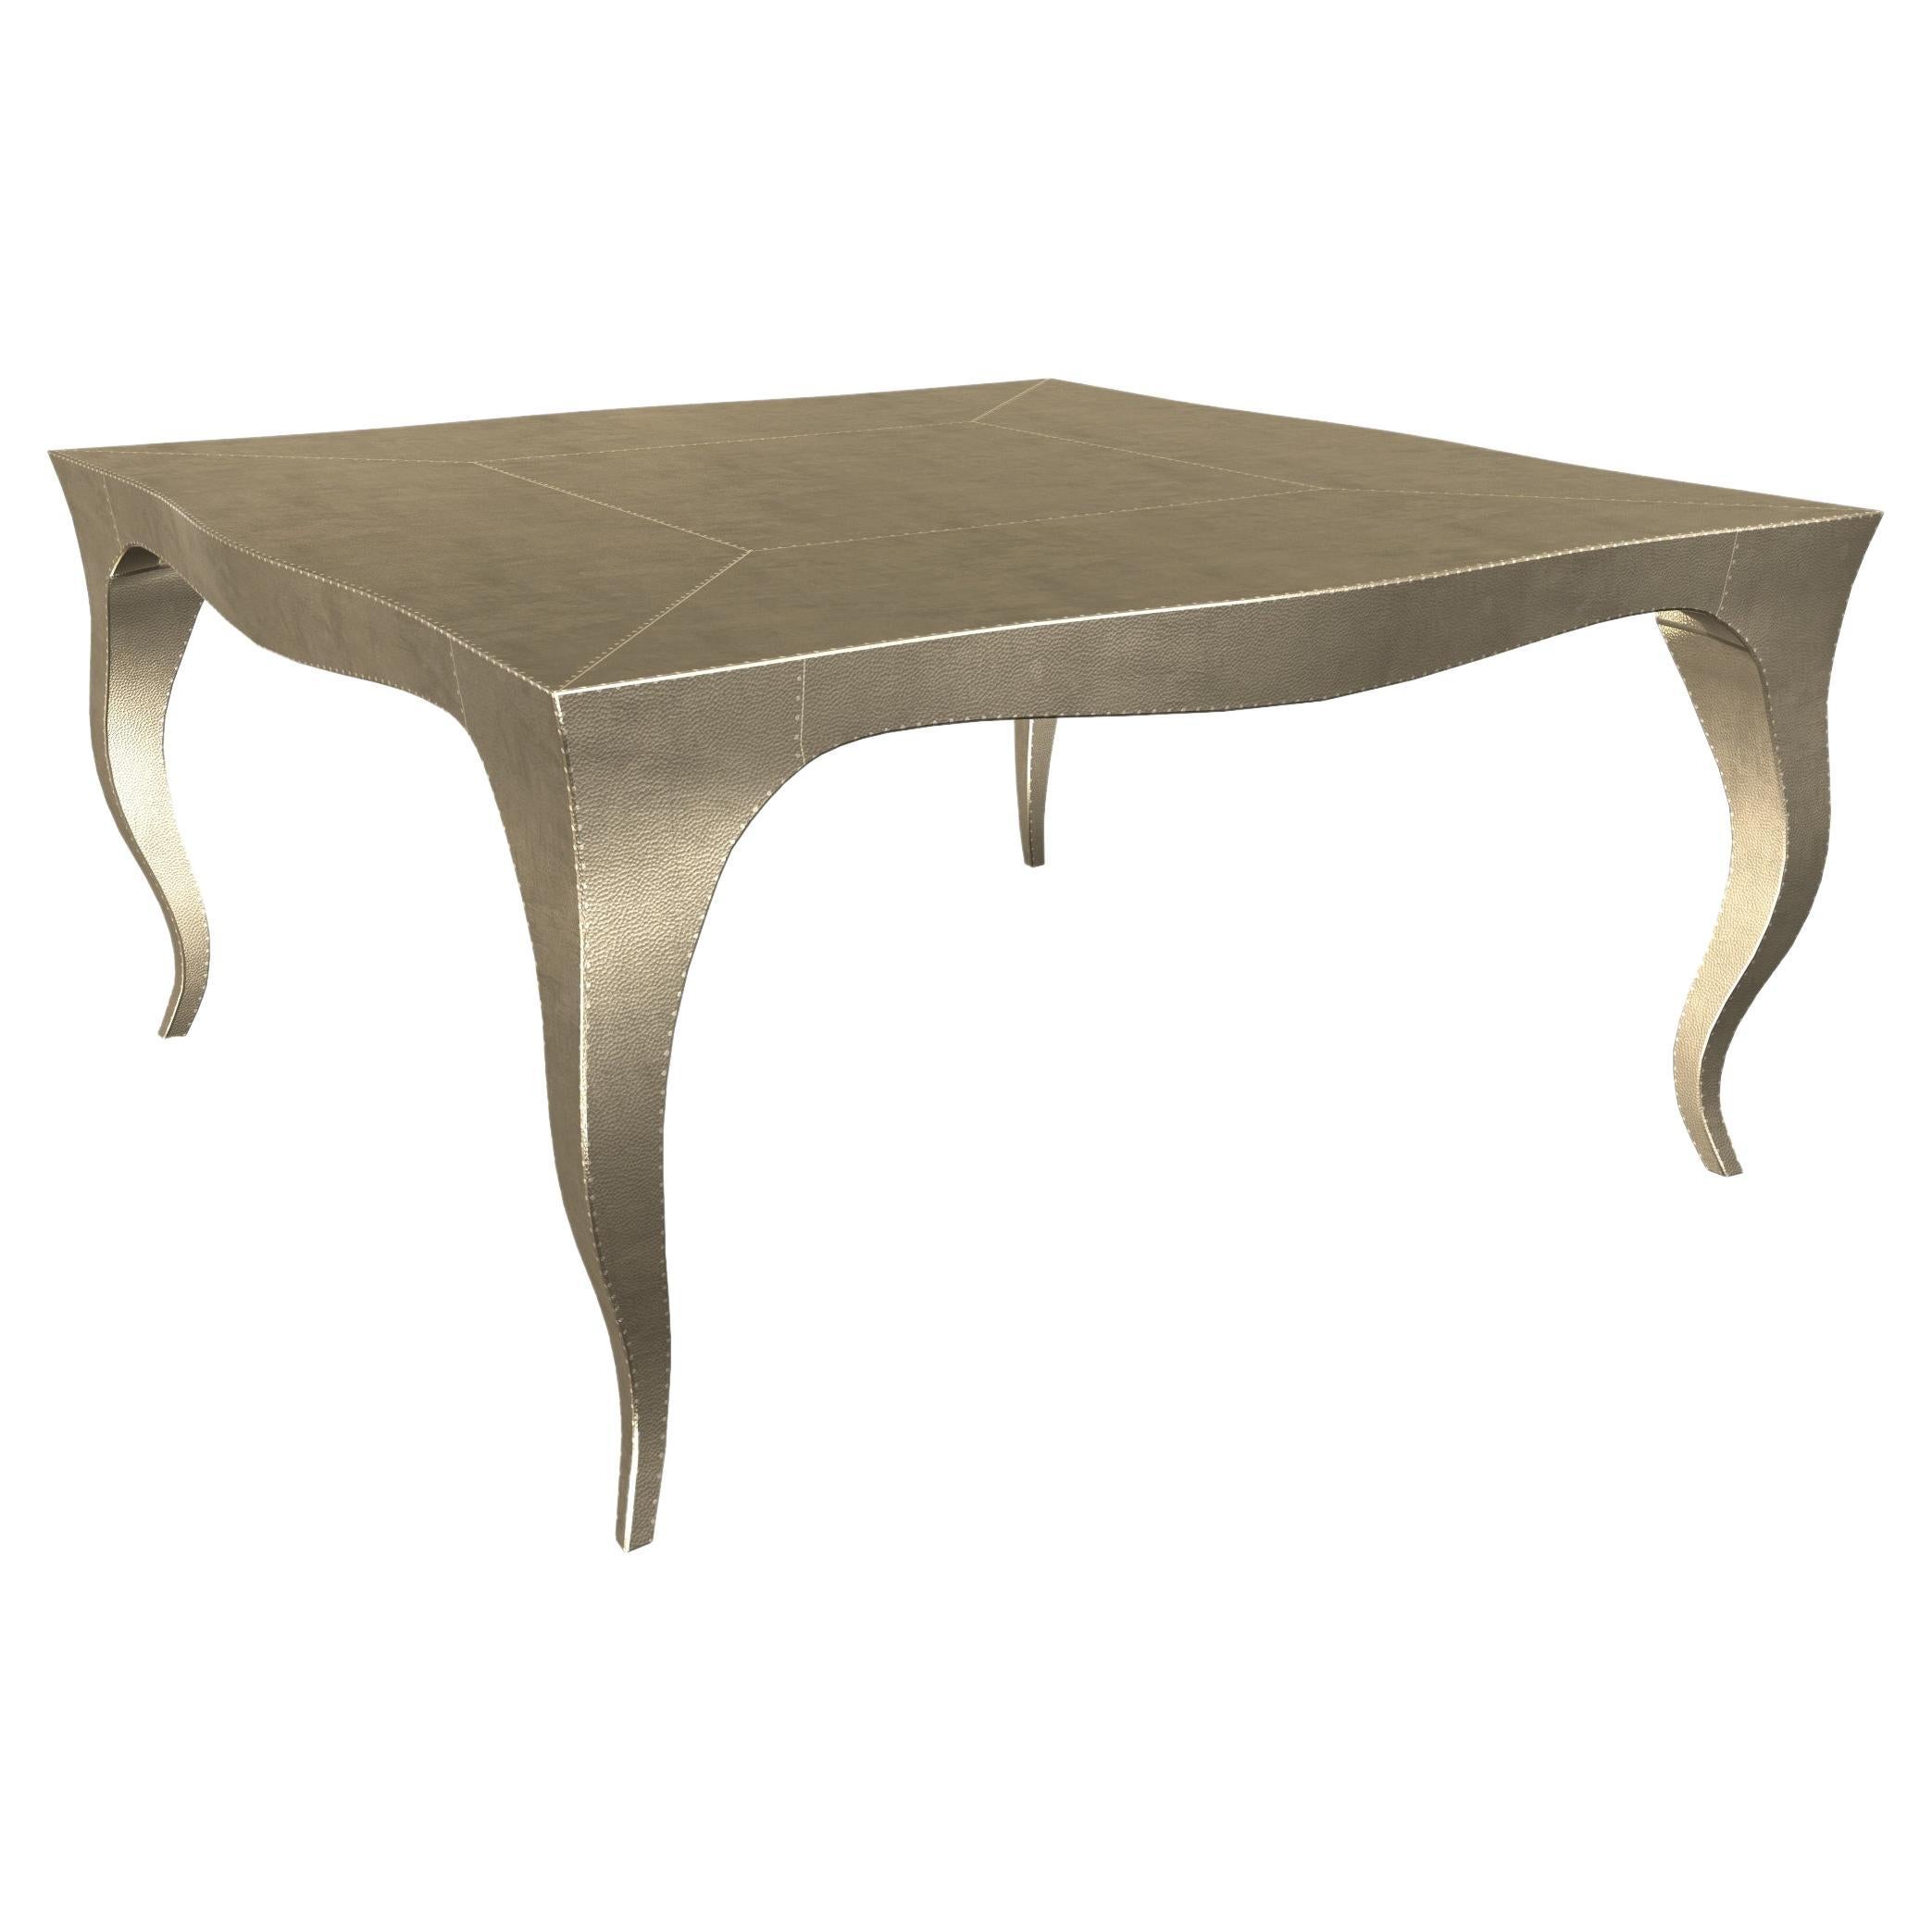 Tables gigognes Art déco Mid. Hammered Brass 18.5x18.5x10 inch by Paul M. en vente